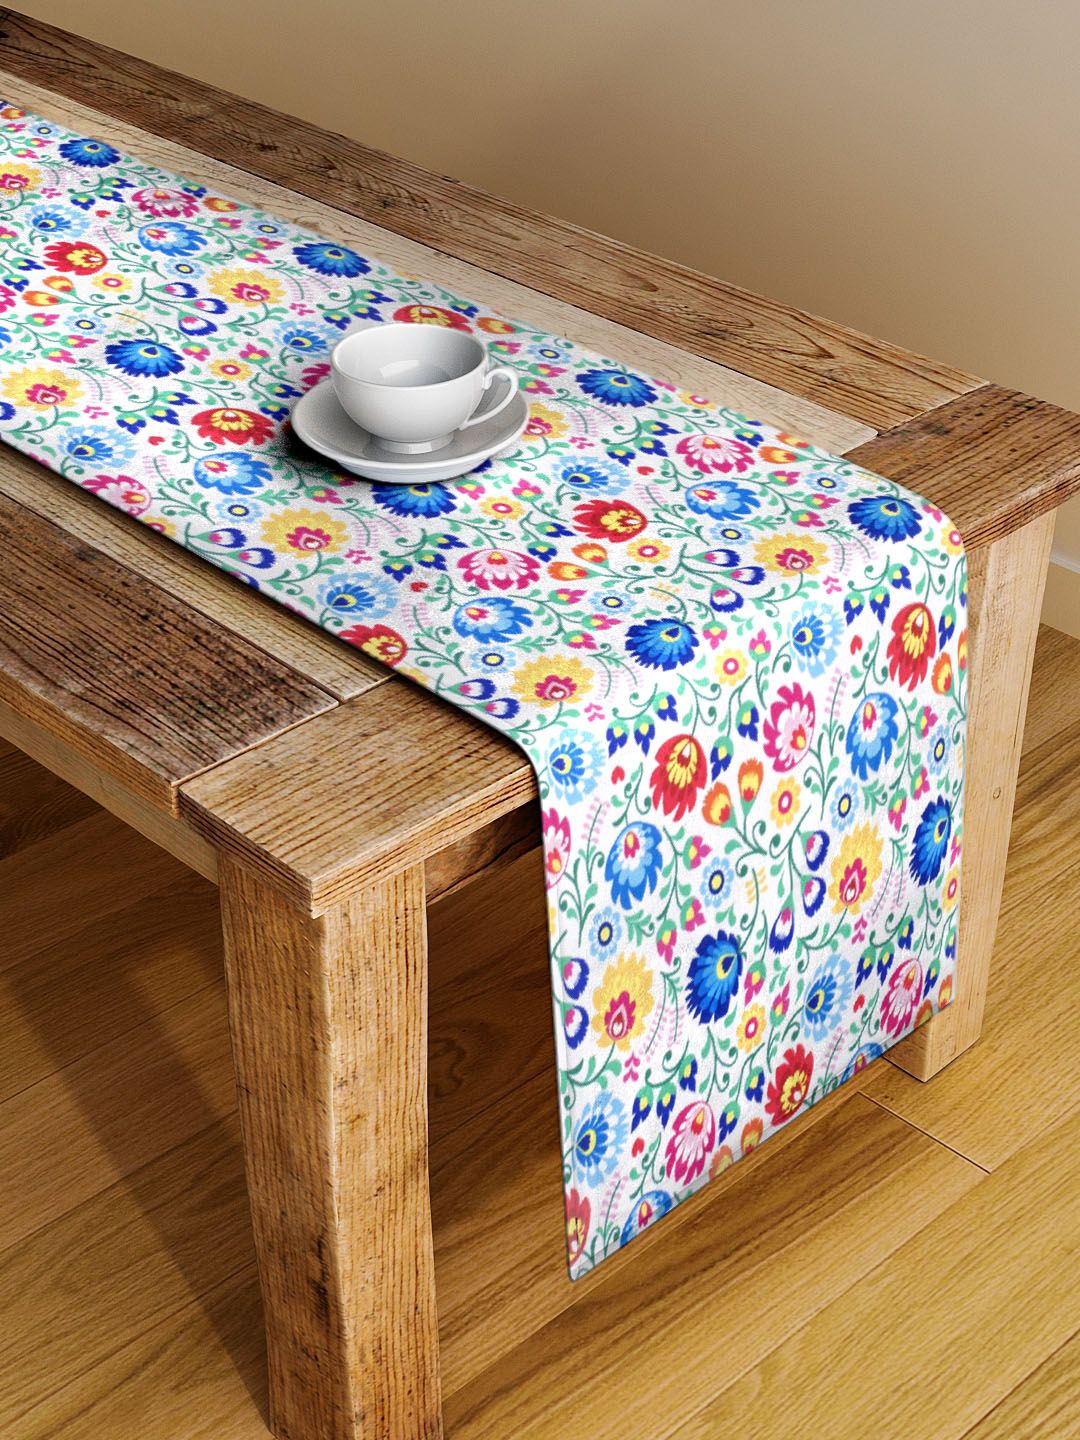 Alina decor Green & Blue Digital Floral-Printed Table Runner Price in India